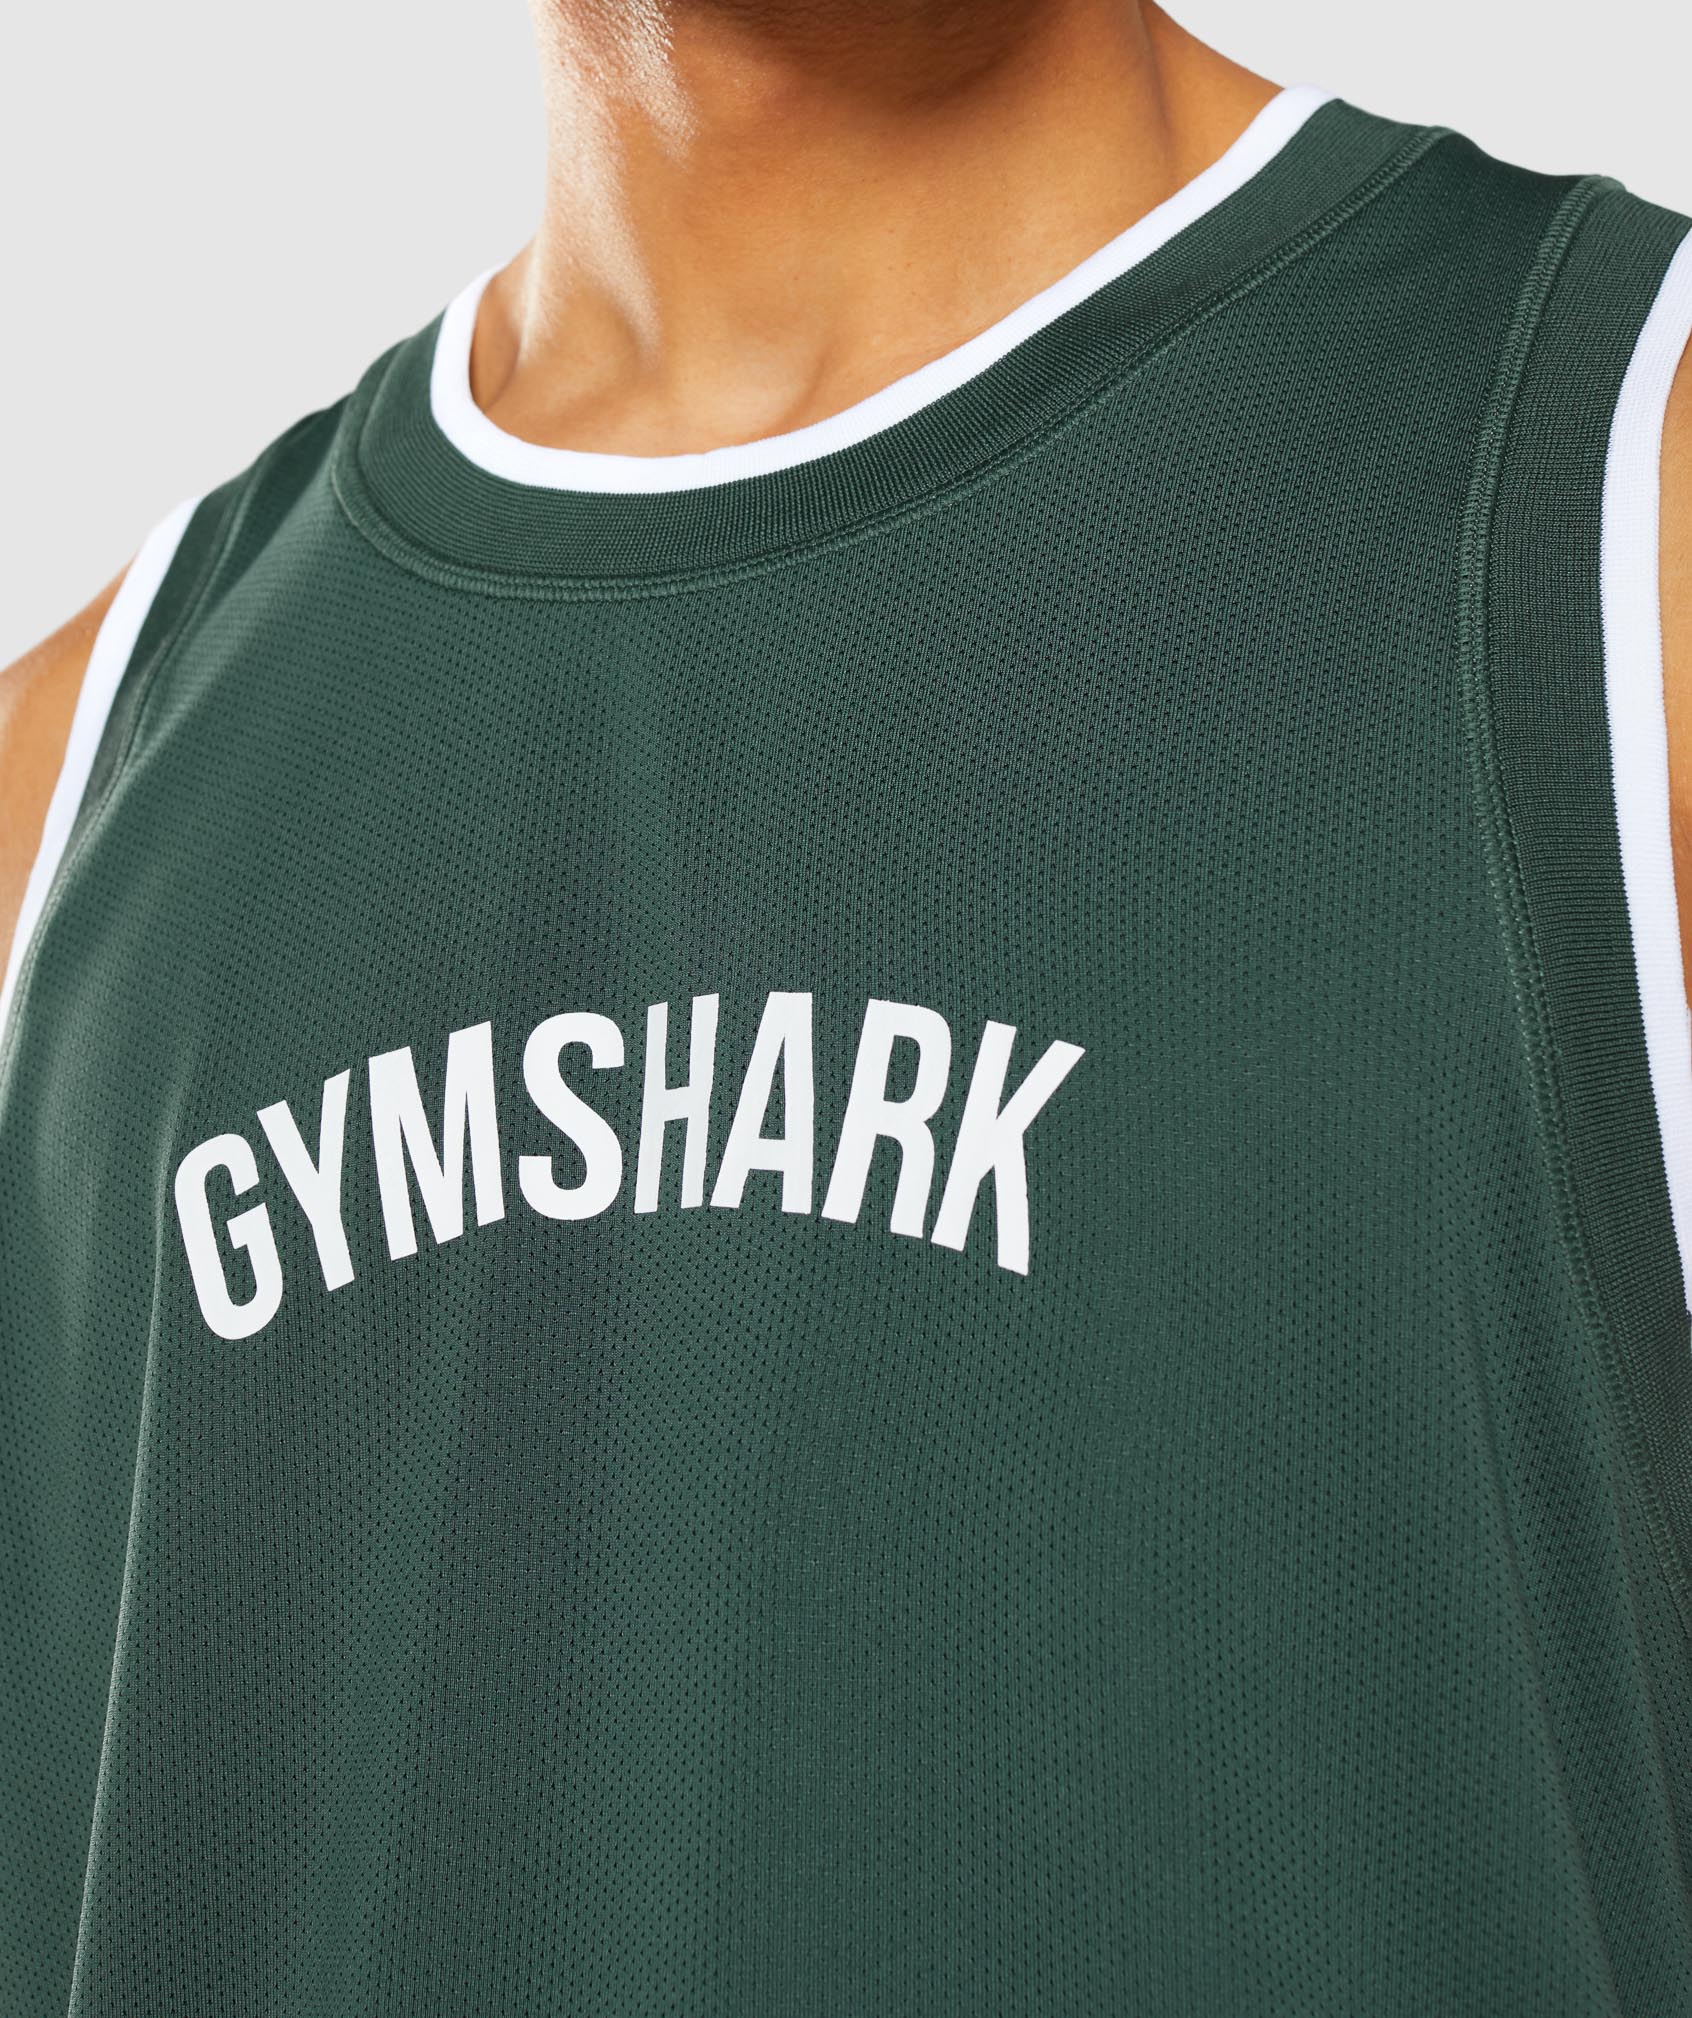 Recess Basketball Tank in Obsidian Green/White - view 6